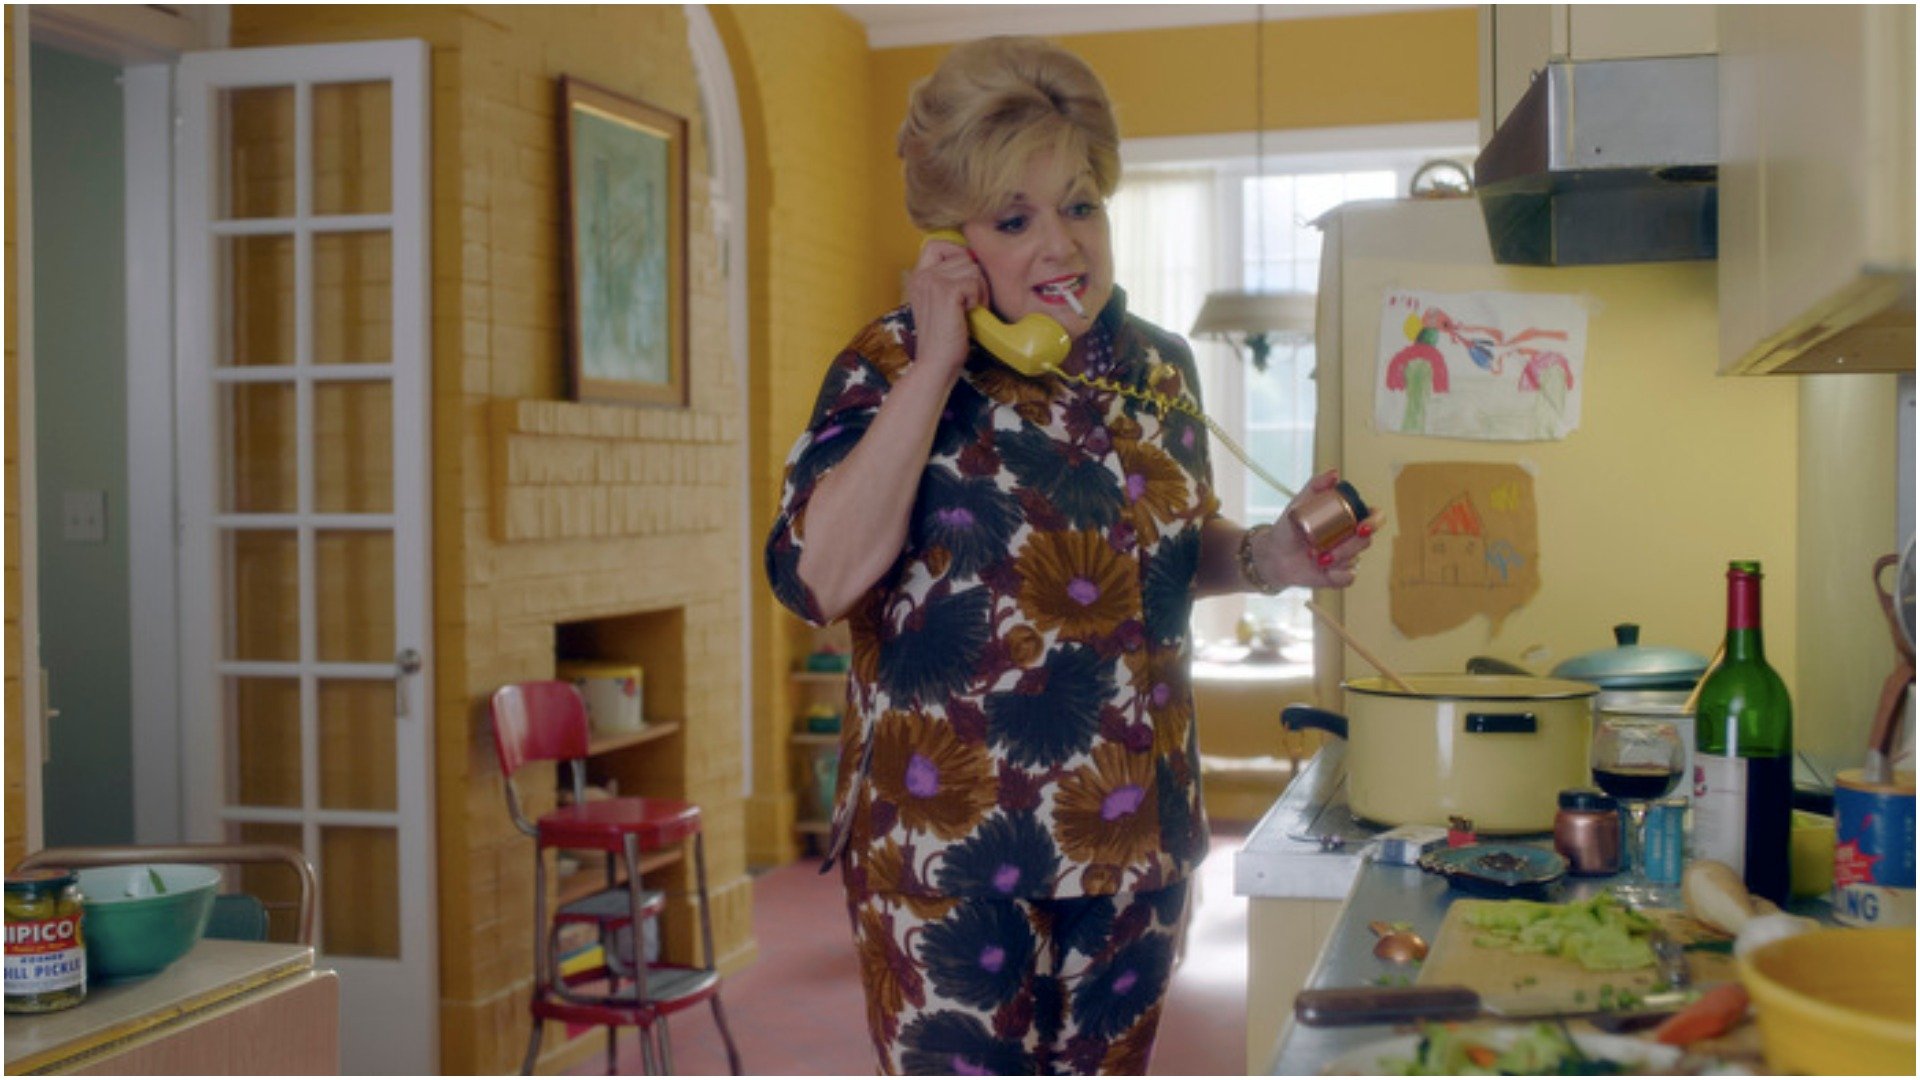 Caroline Aaron as Shirley Maisel in 'The Marvelous Mrs. Maisel' talks on the phone while smoking